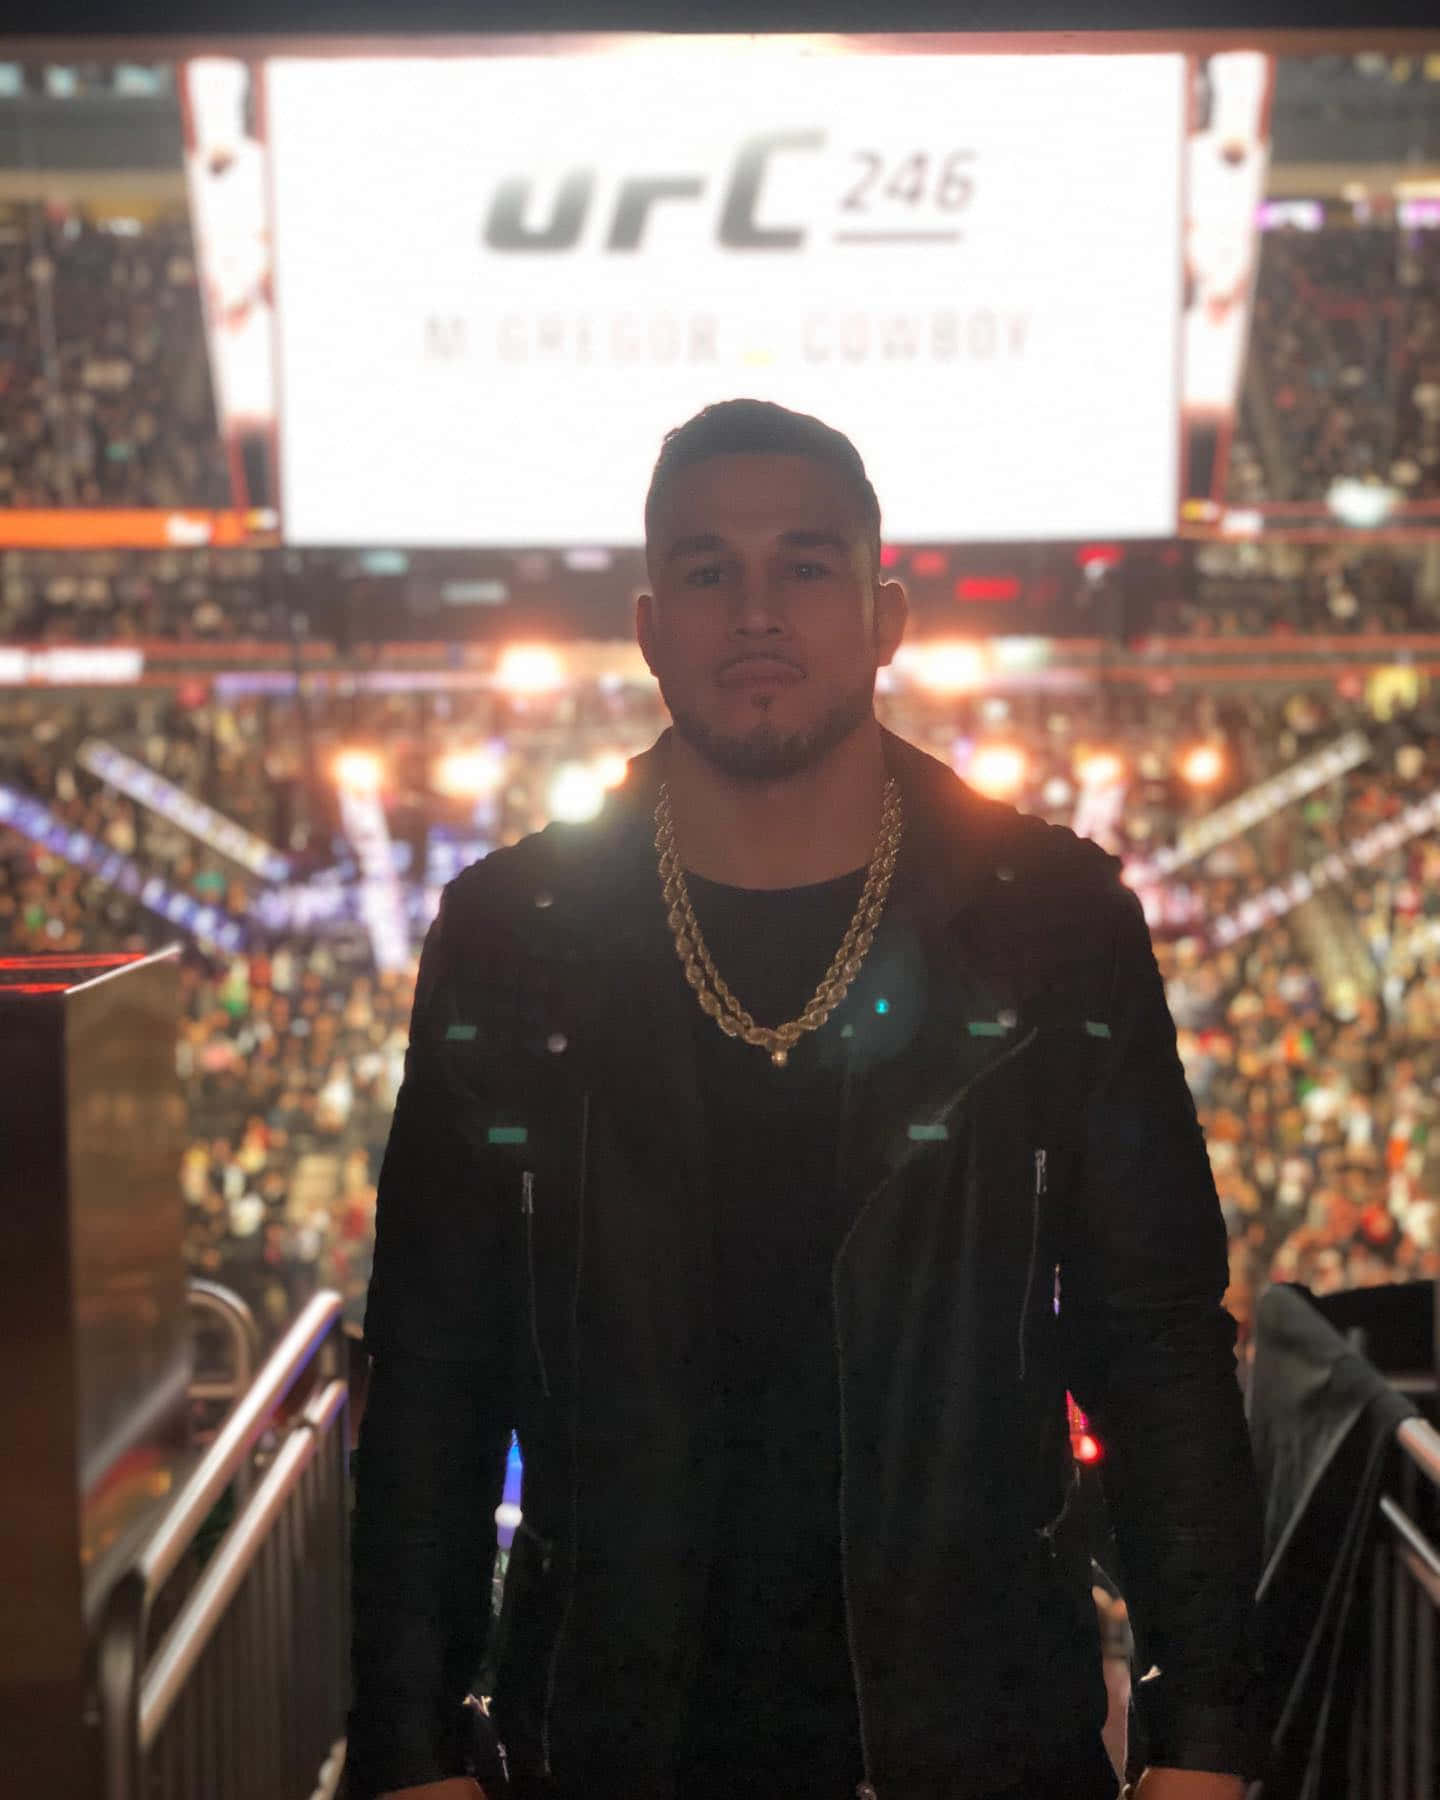 UFC Fighter Brad Tavares In Front Of Crowd Wallpaper